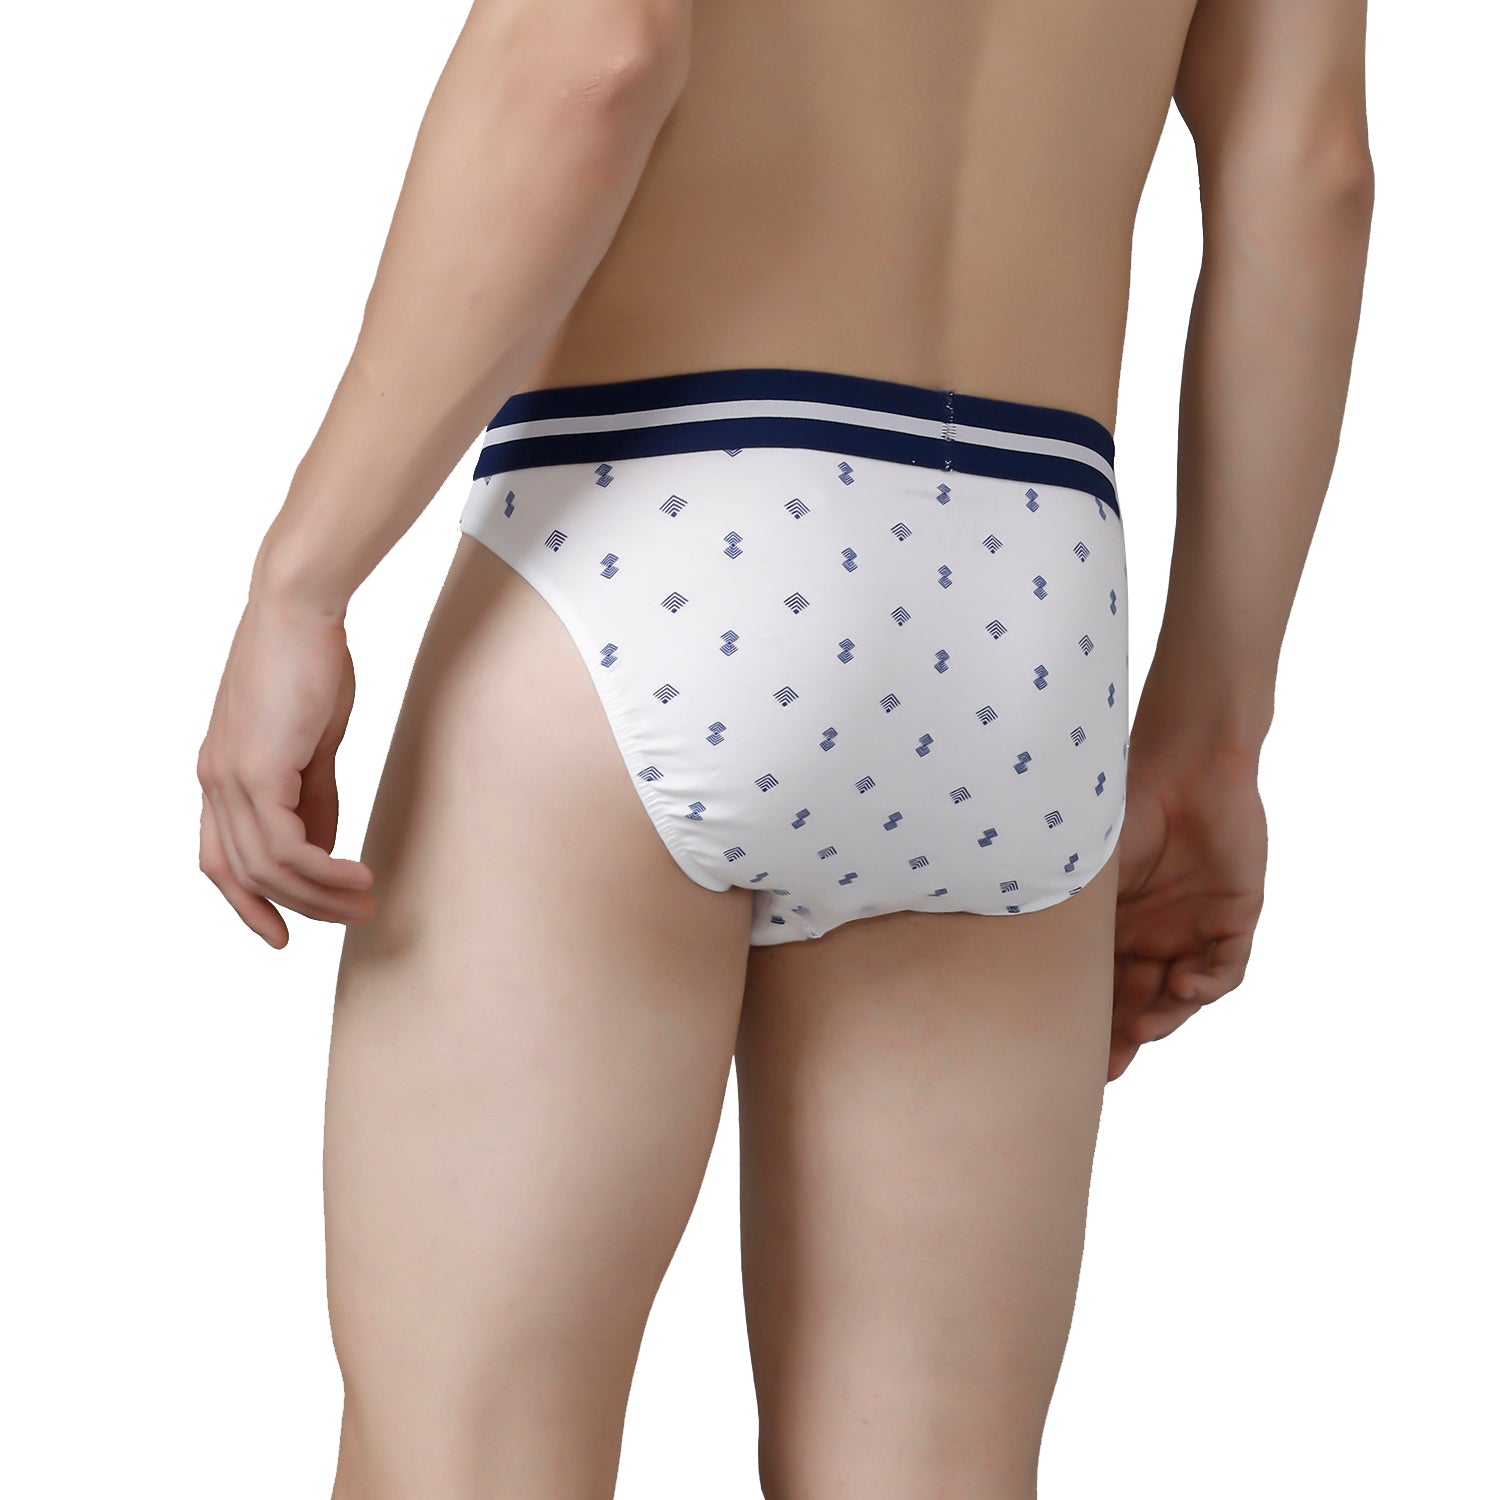 CP BRO Men's Printed Briefs with Exposed Waistband Value Pack - Orange & White (Pack of 2)